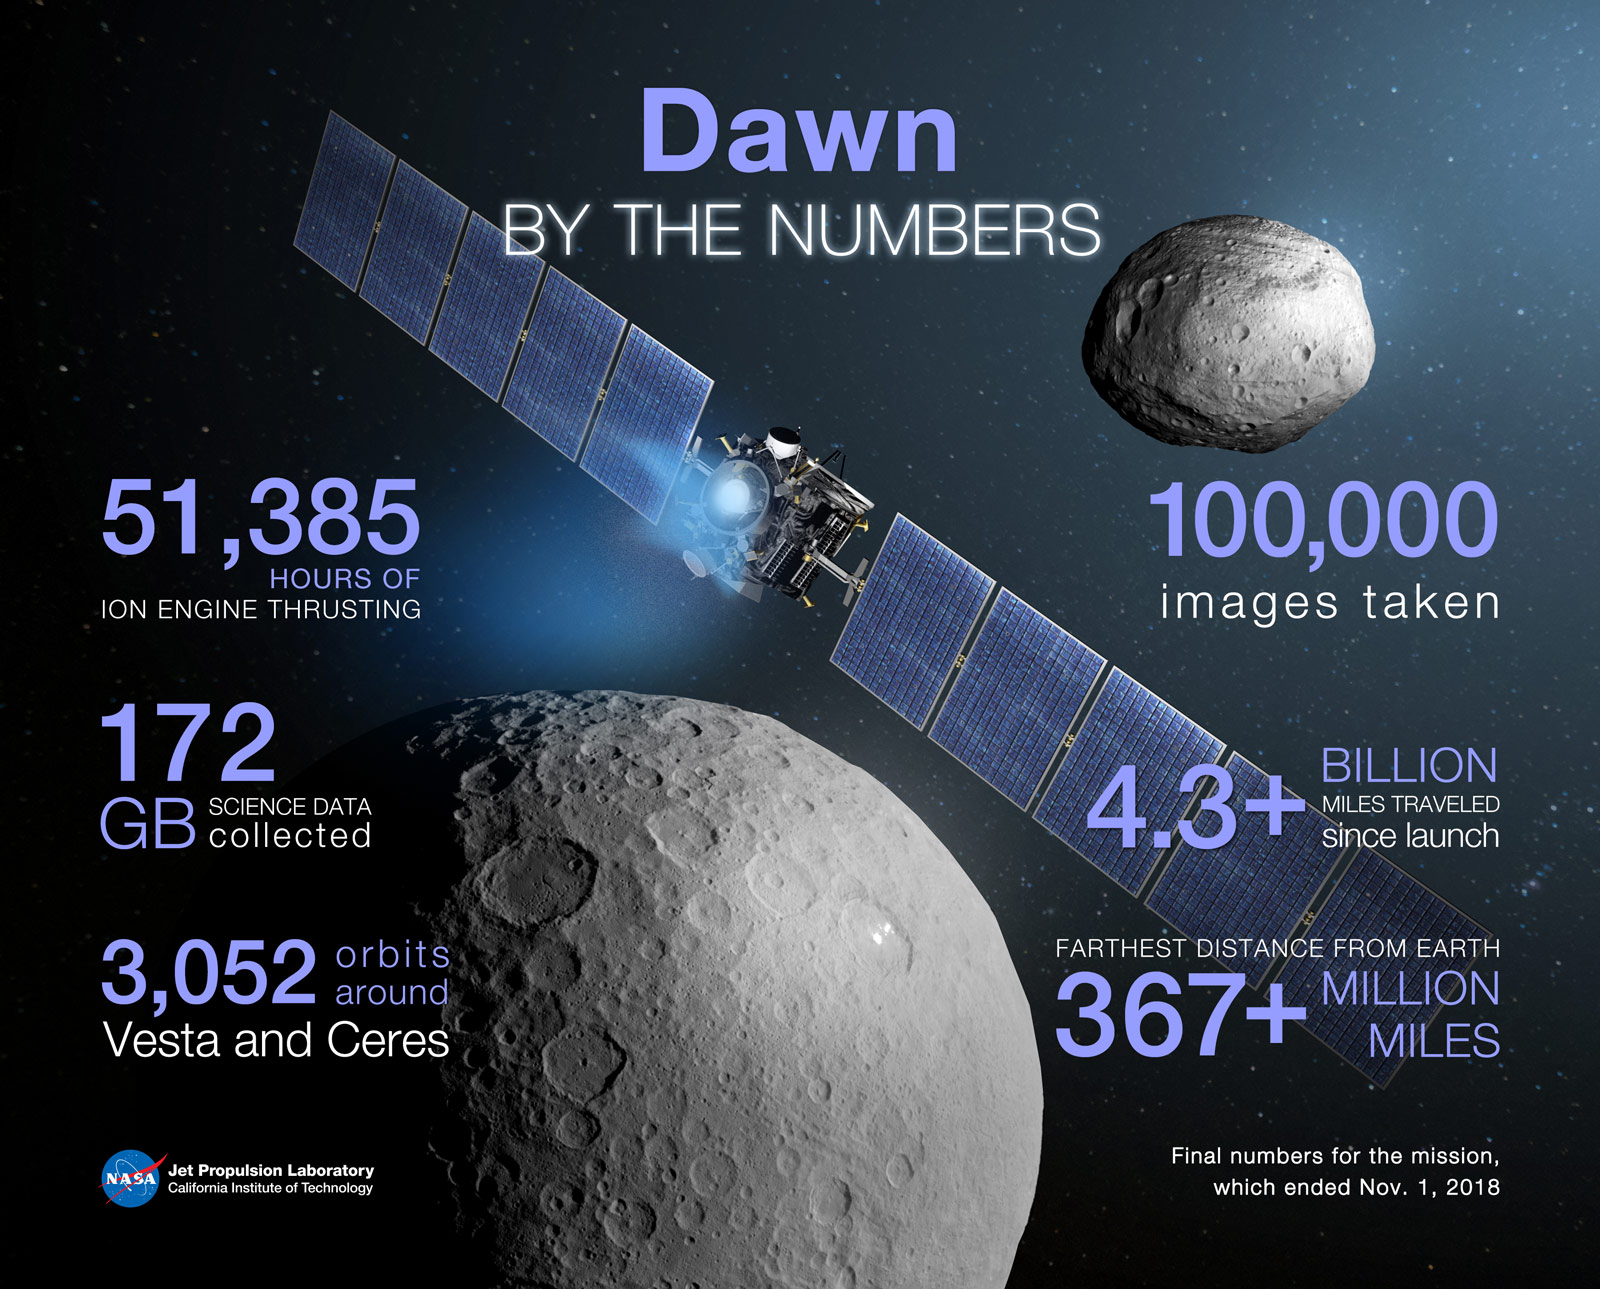 Infographic showing stats on the Dawn mission